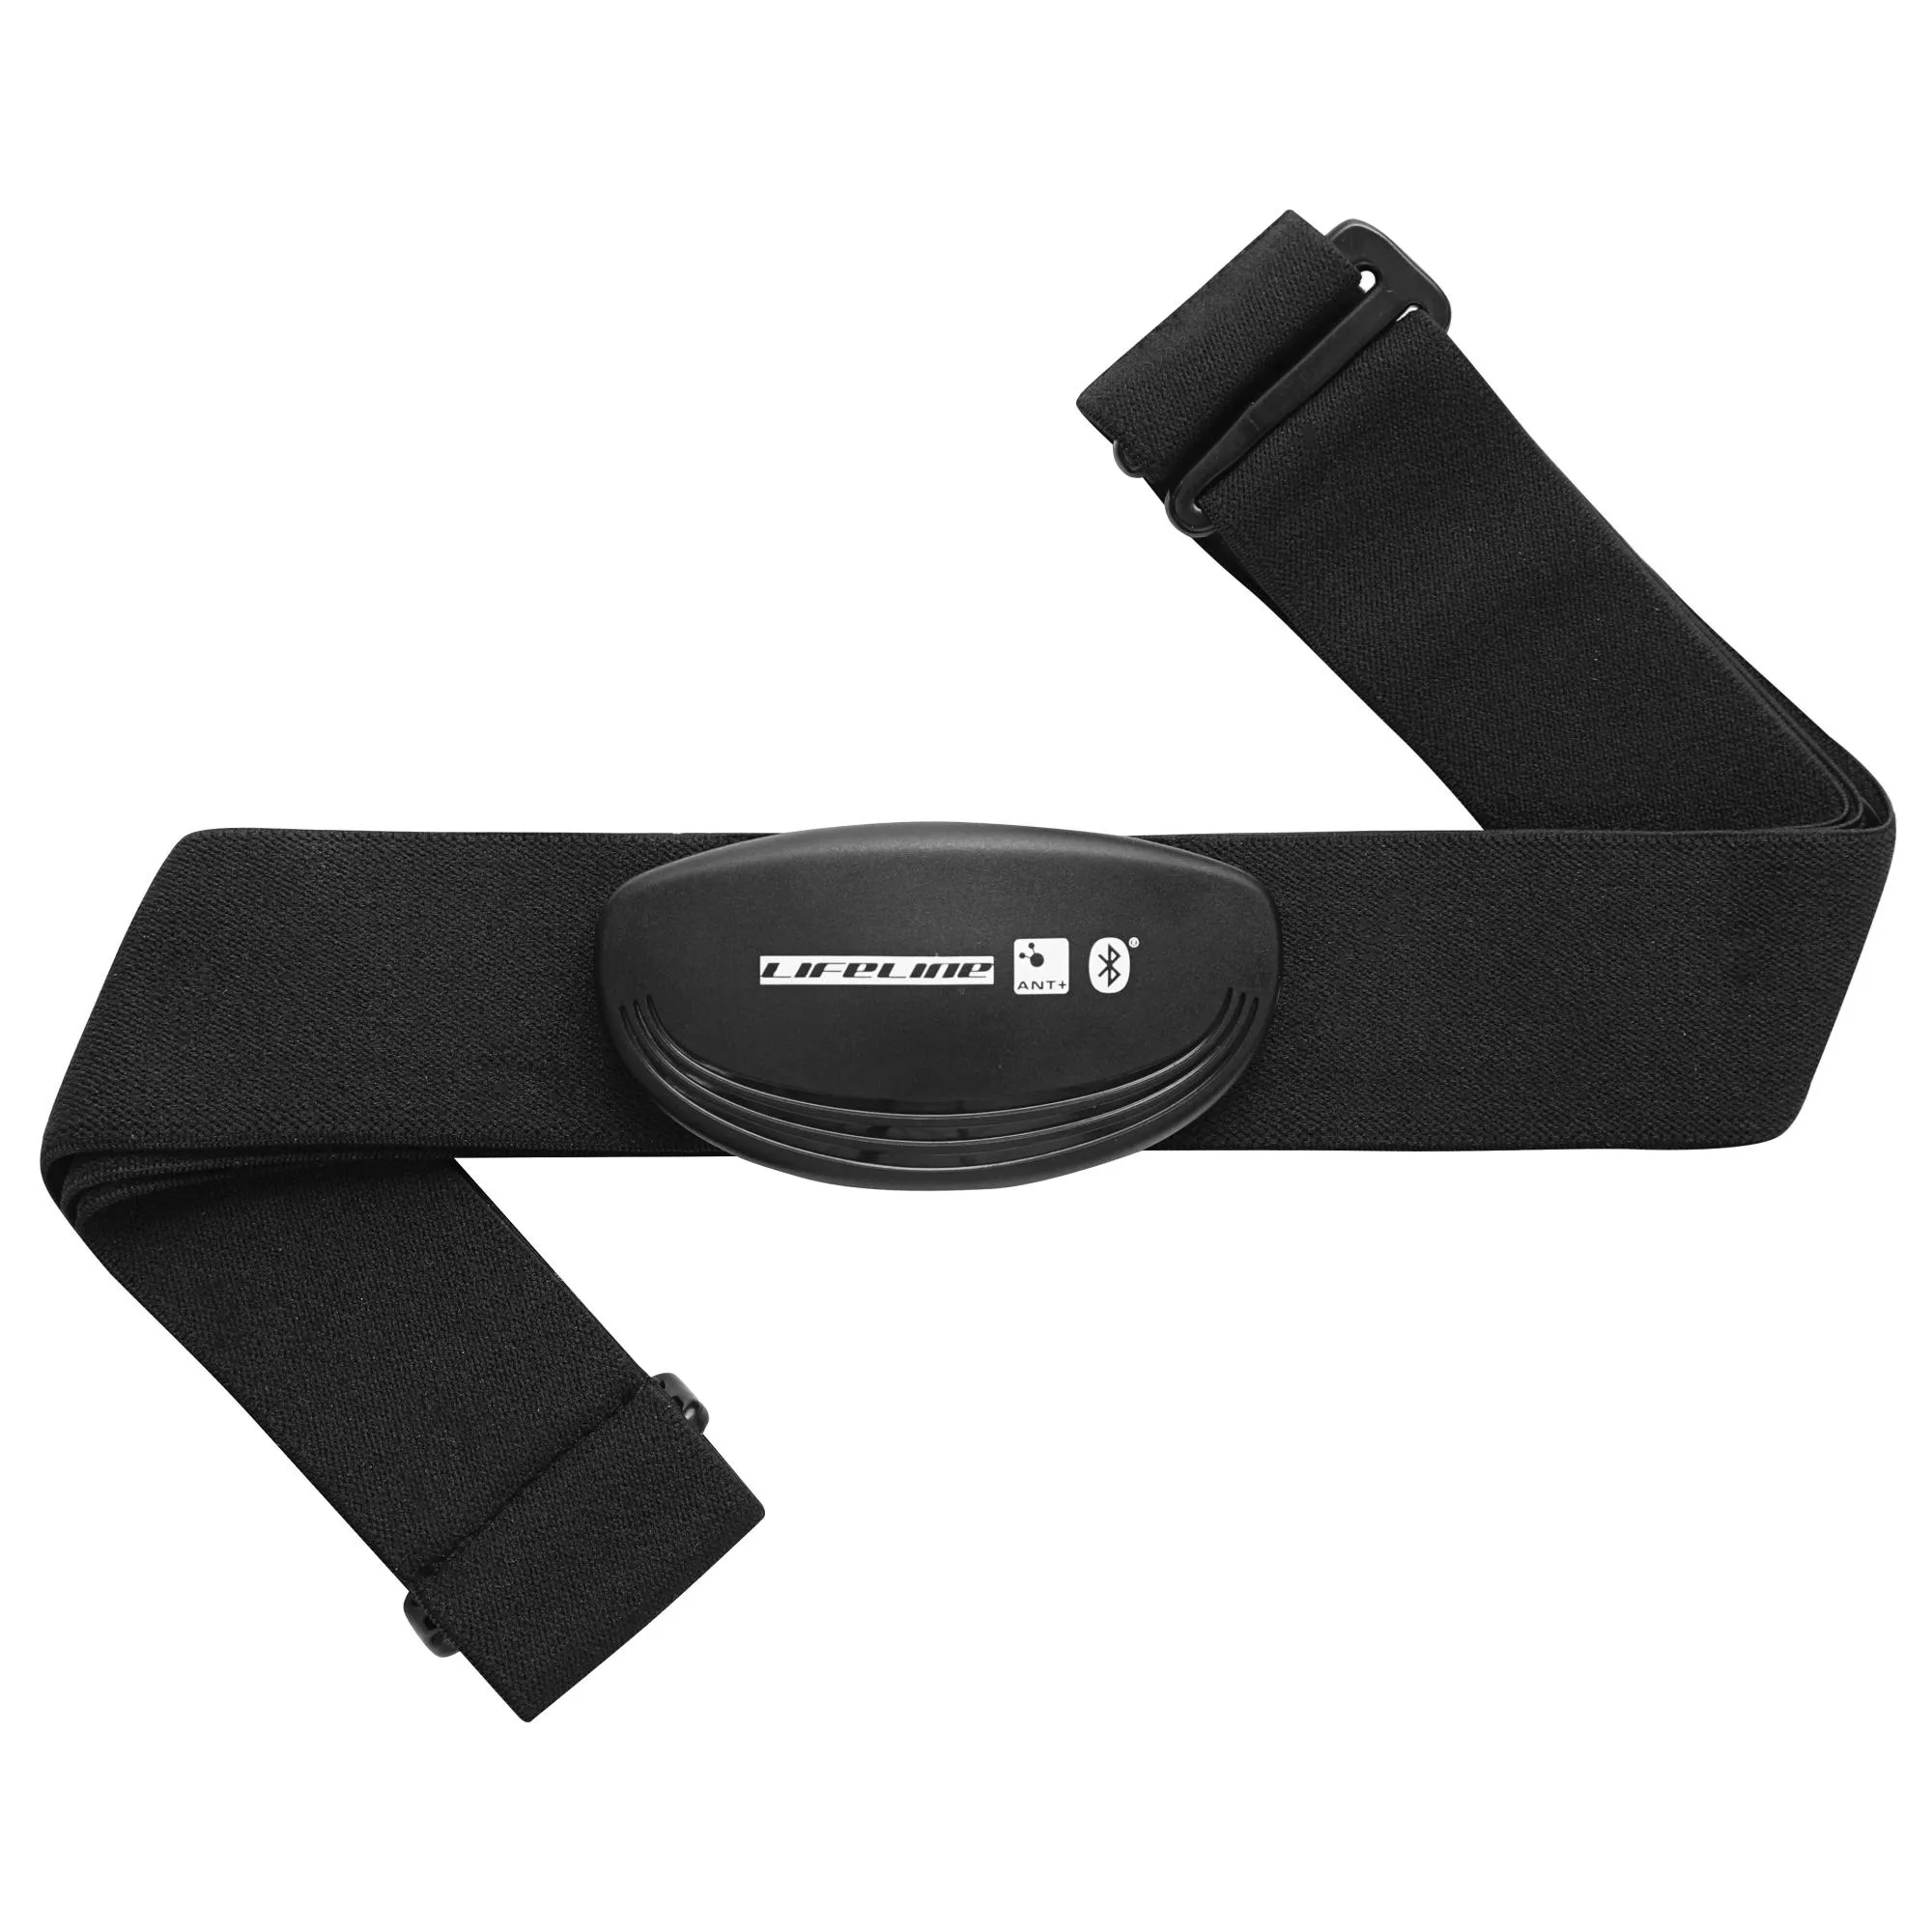  Bluetooth & ANT+ Heart Rate Monitor, Black